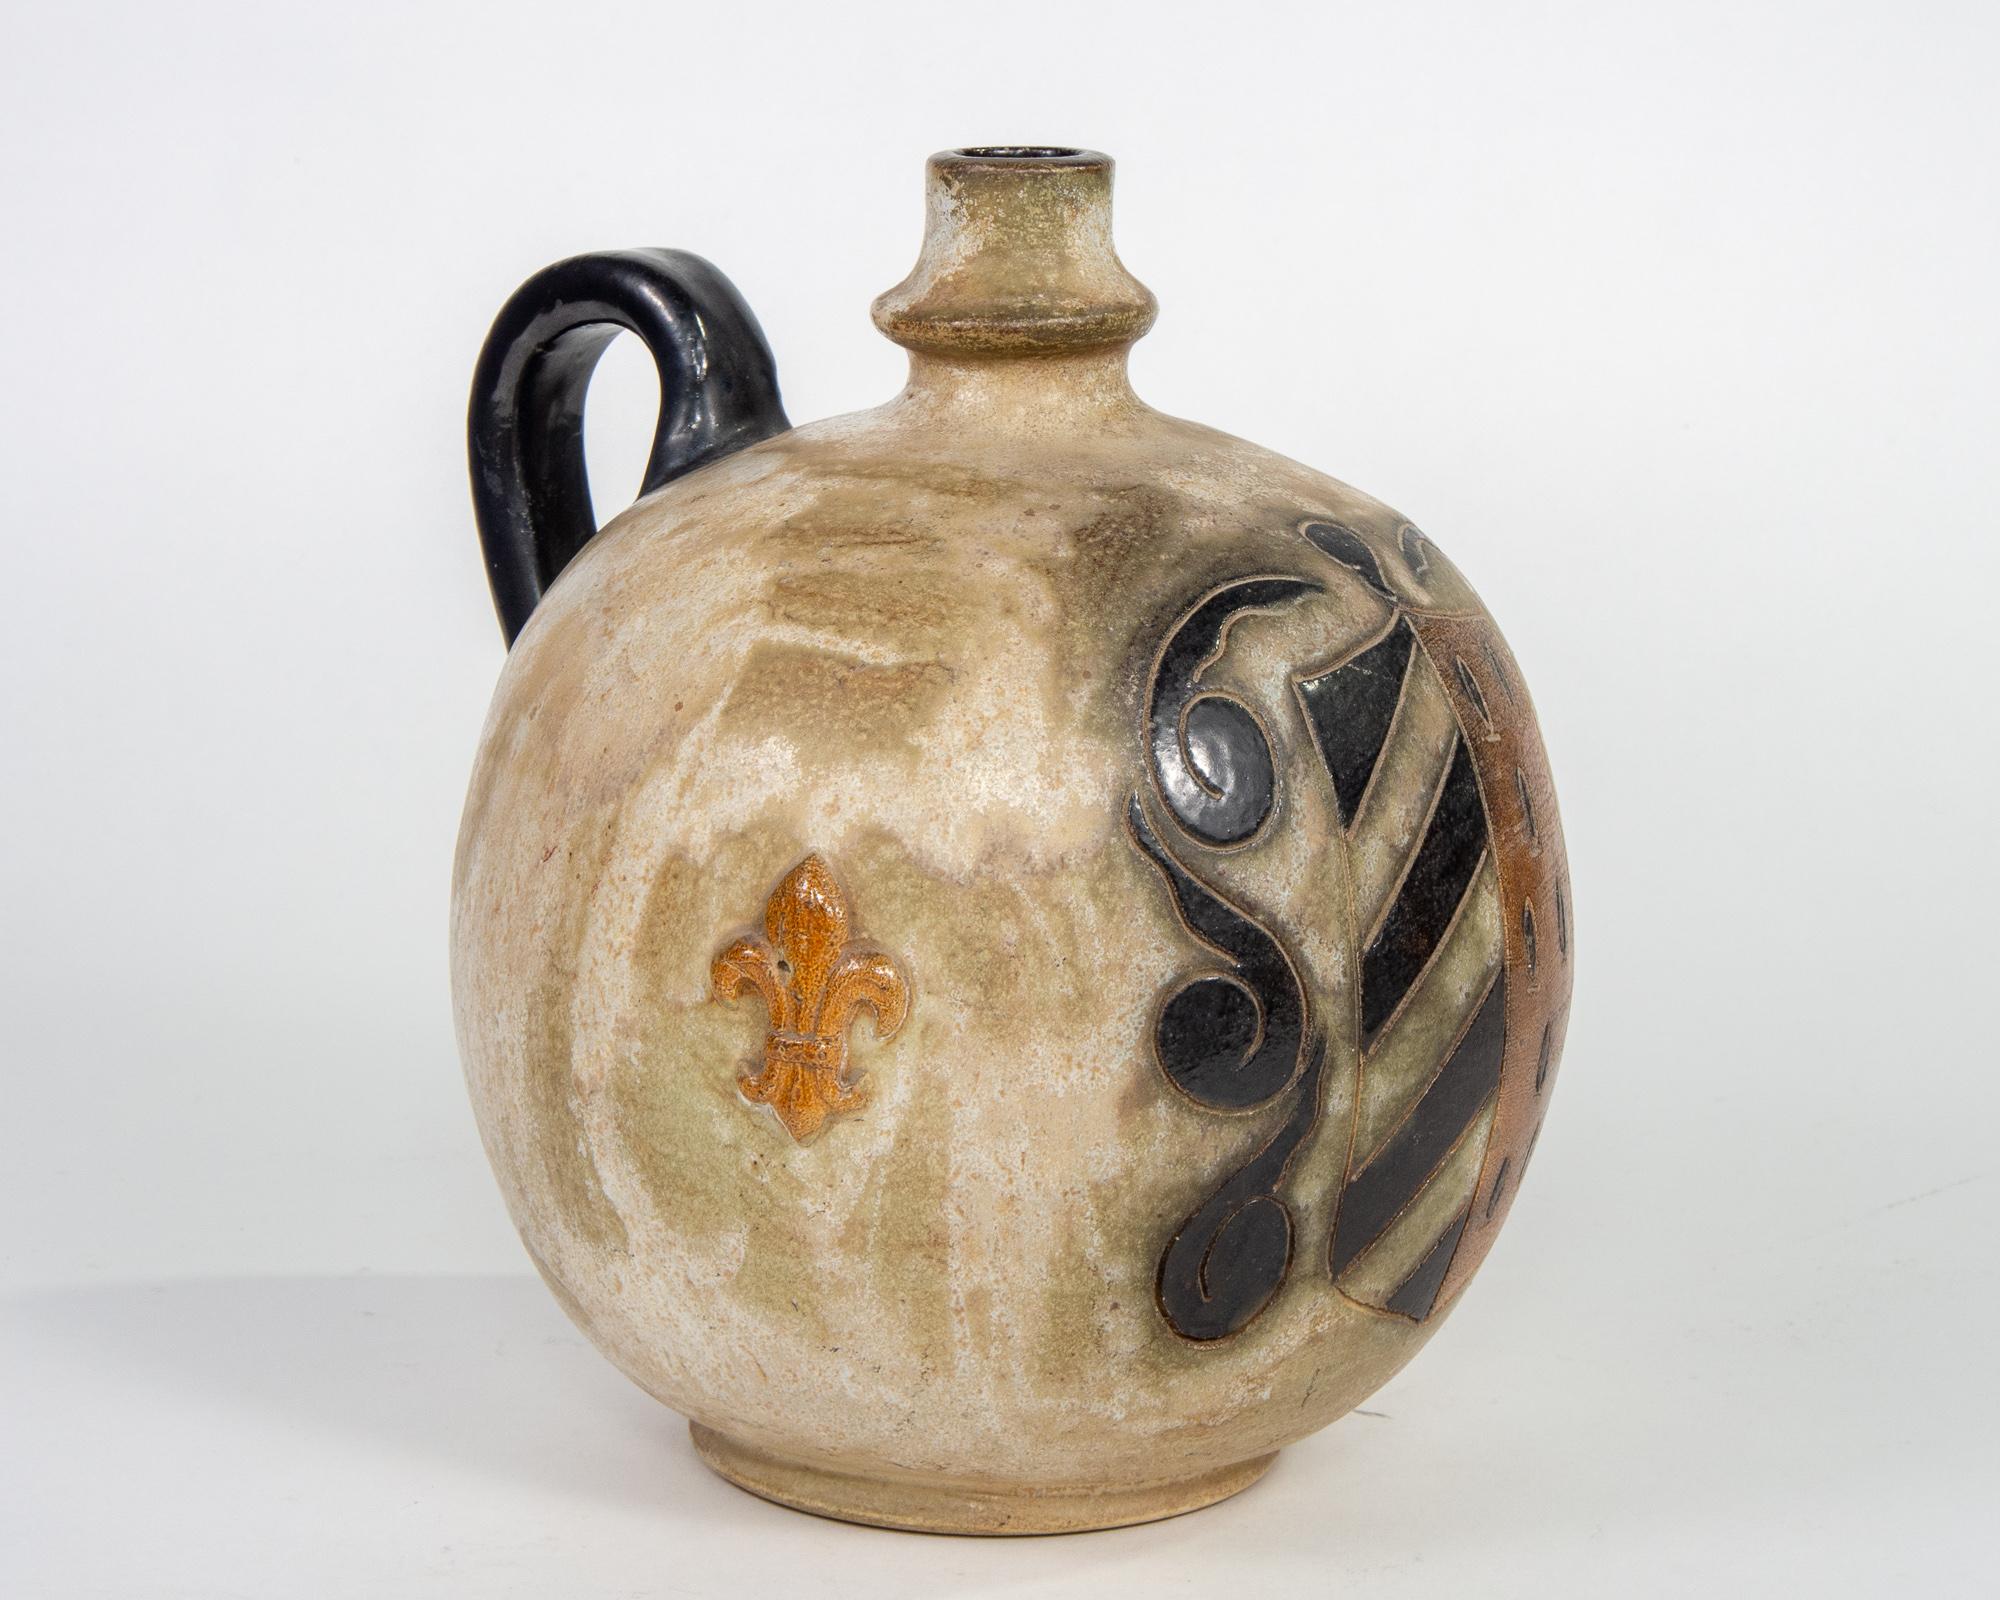 Midcentury ceramic jug by Guerin of Bouffioulx, Belgium has a globe-shaped body, black handle and narrow neck. Design is etched and glazed depiction of shield and fleur-de-lis. Etched signature on underside of base.